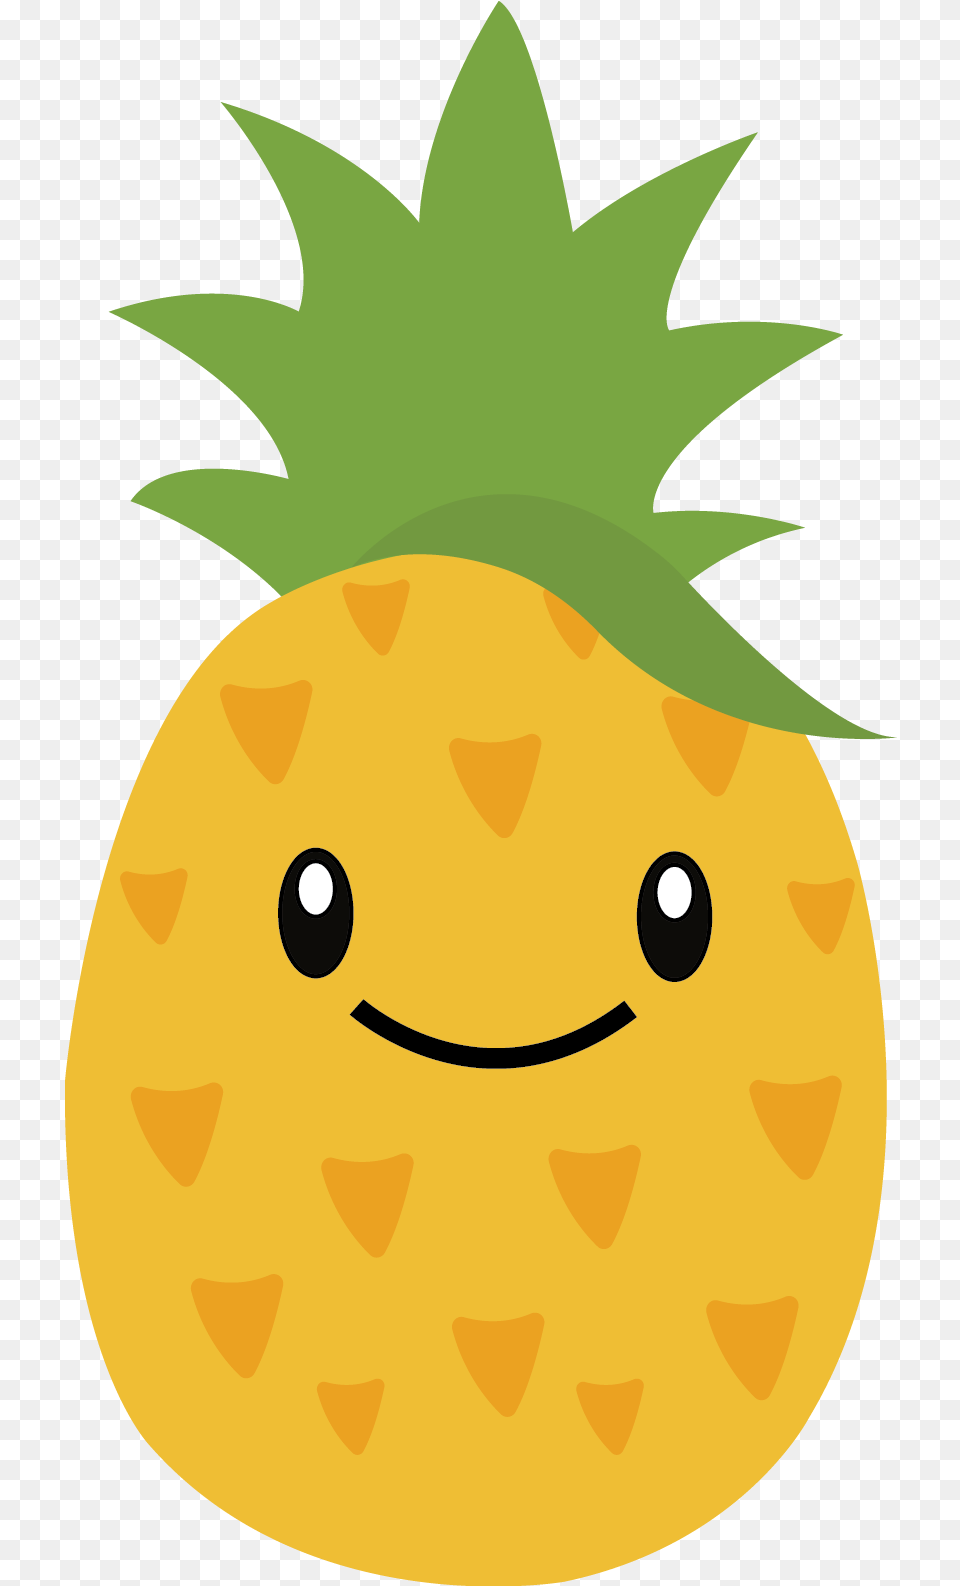 Download Hd Pineapple Pineapple With Face Pineapple With Face, Food, Fruit, Plant, Produce Png